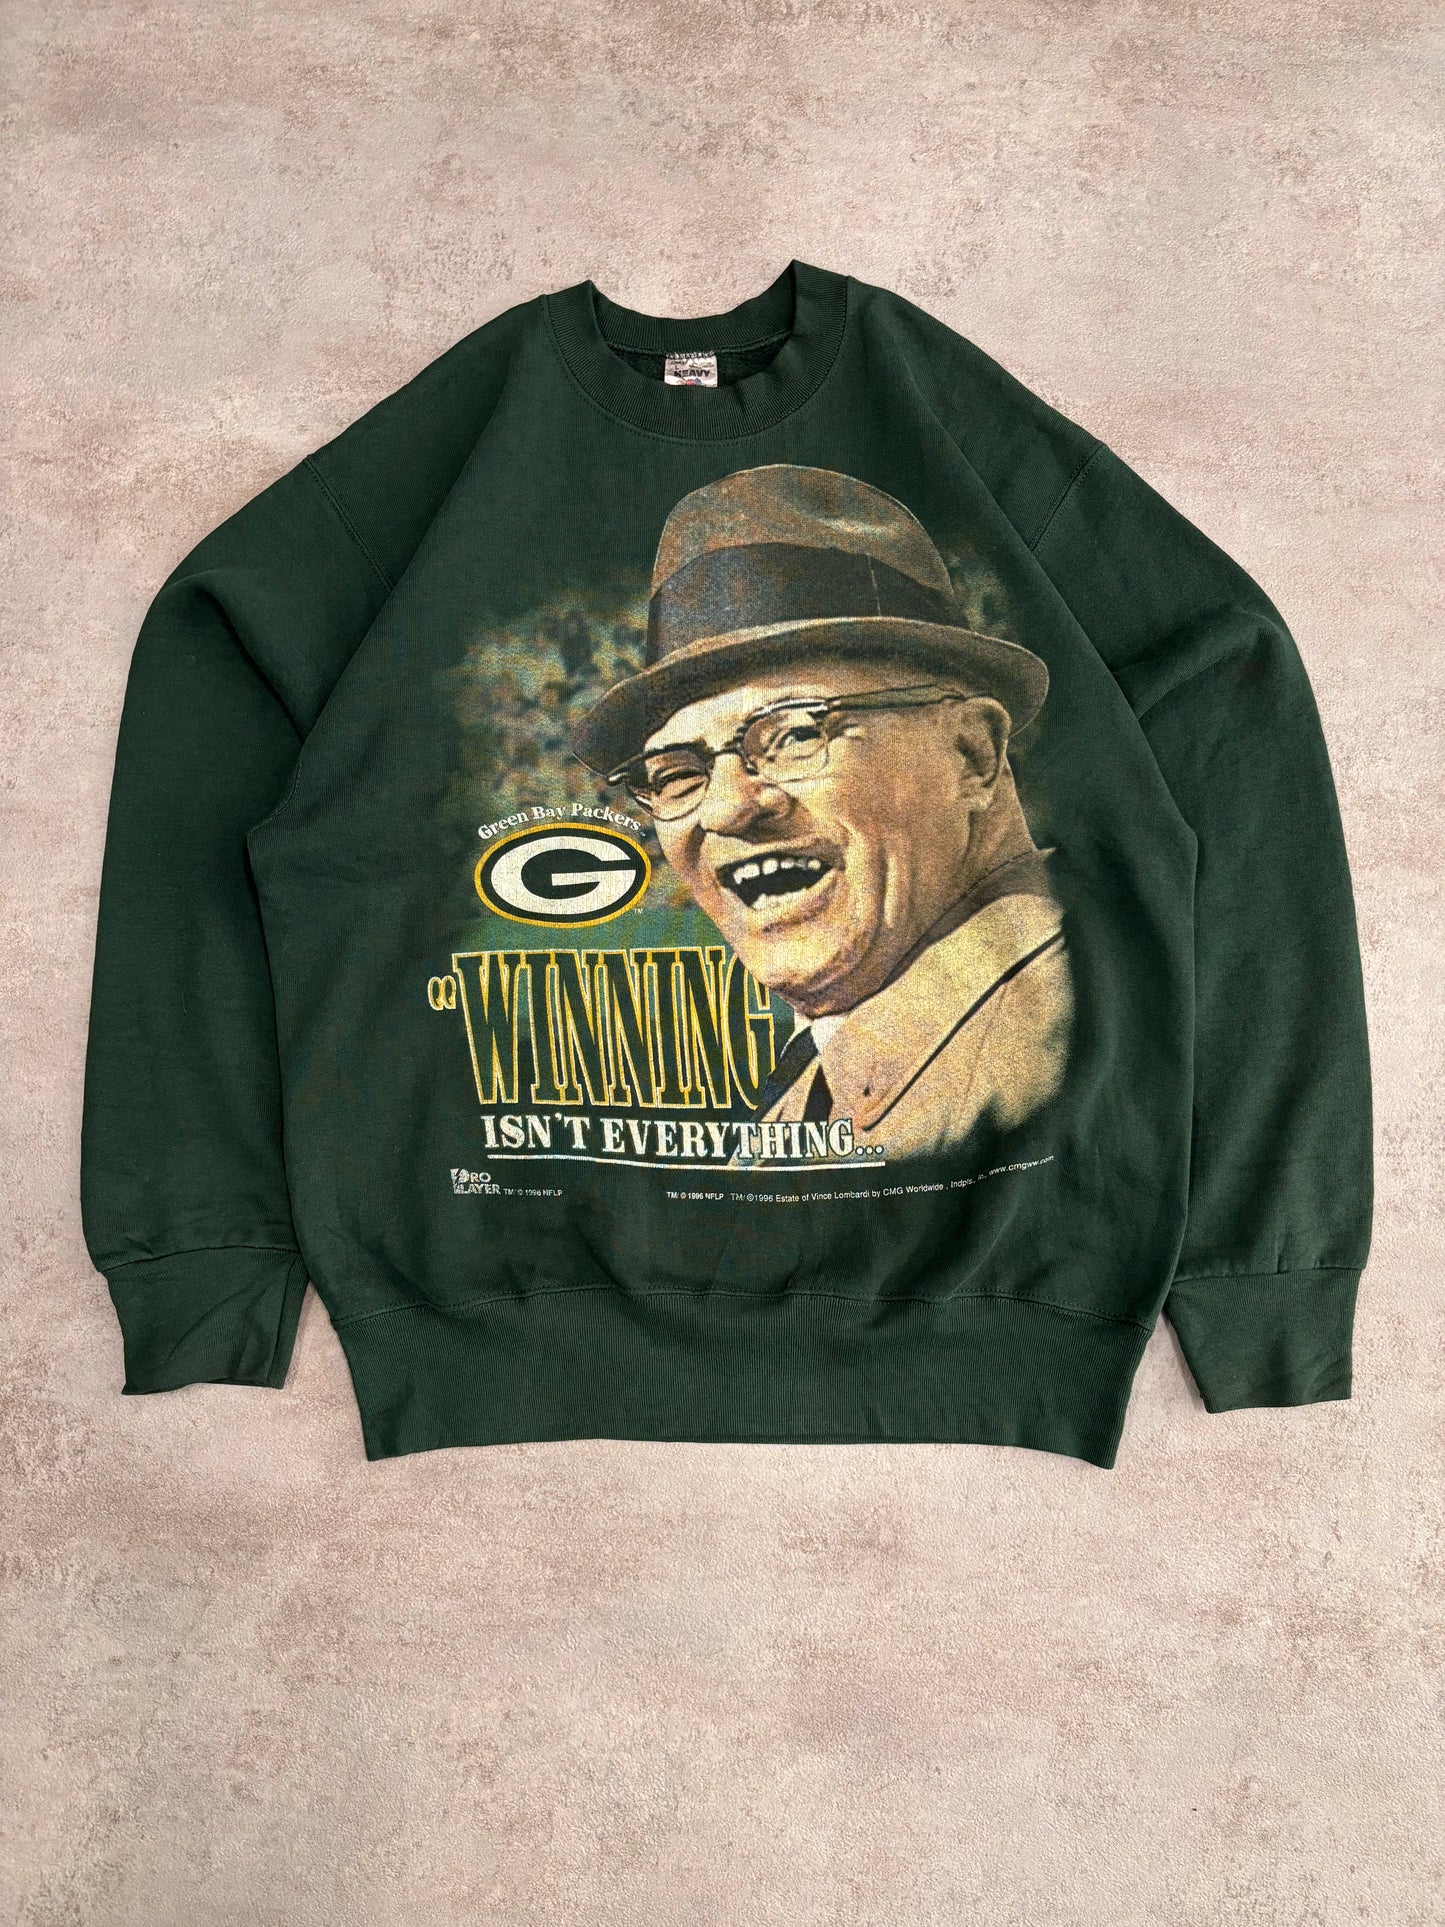 Sudadera Gráfica Fruit Of The Loom Super Bowl Winners Green Bay Packers 1996/97 Licensed - L